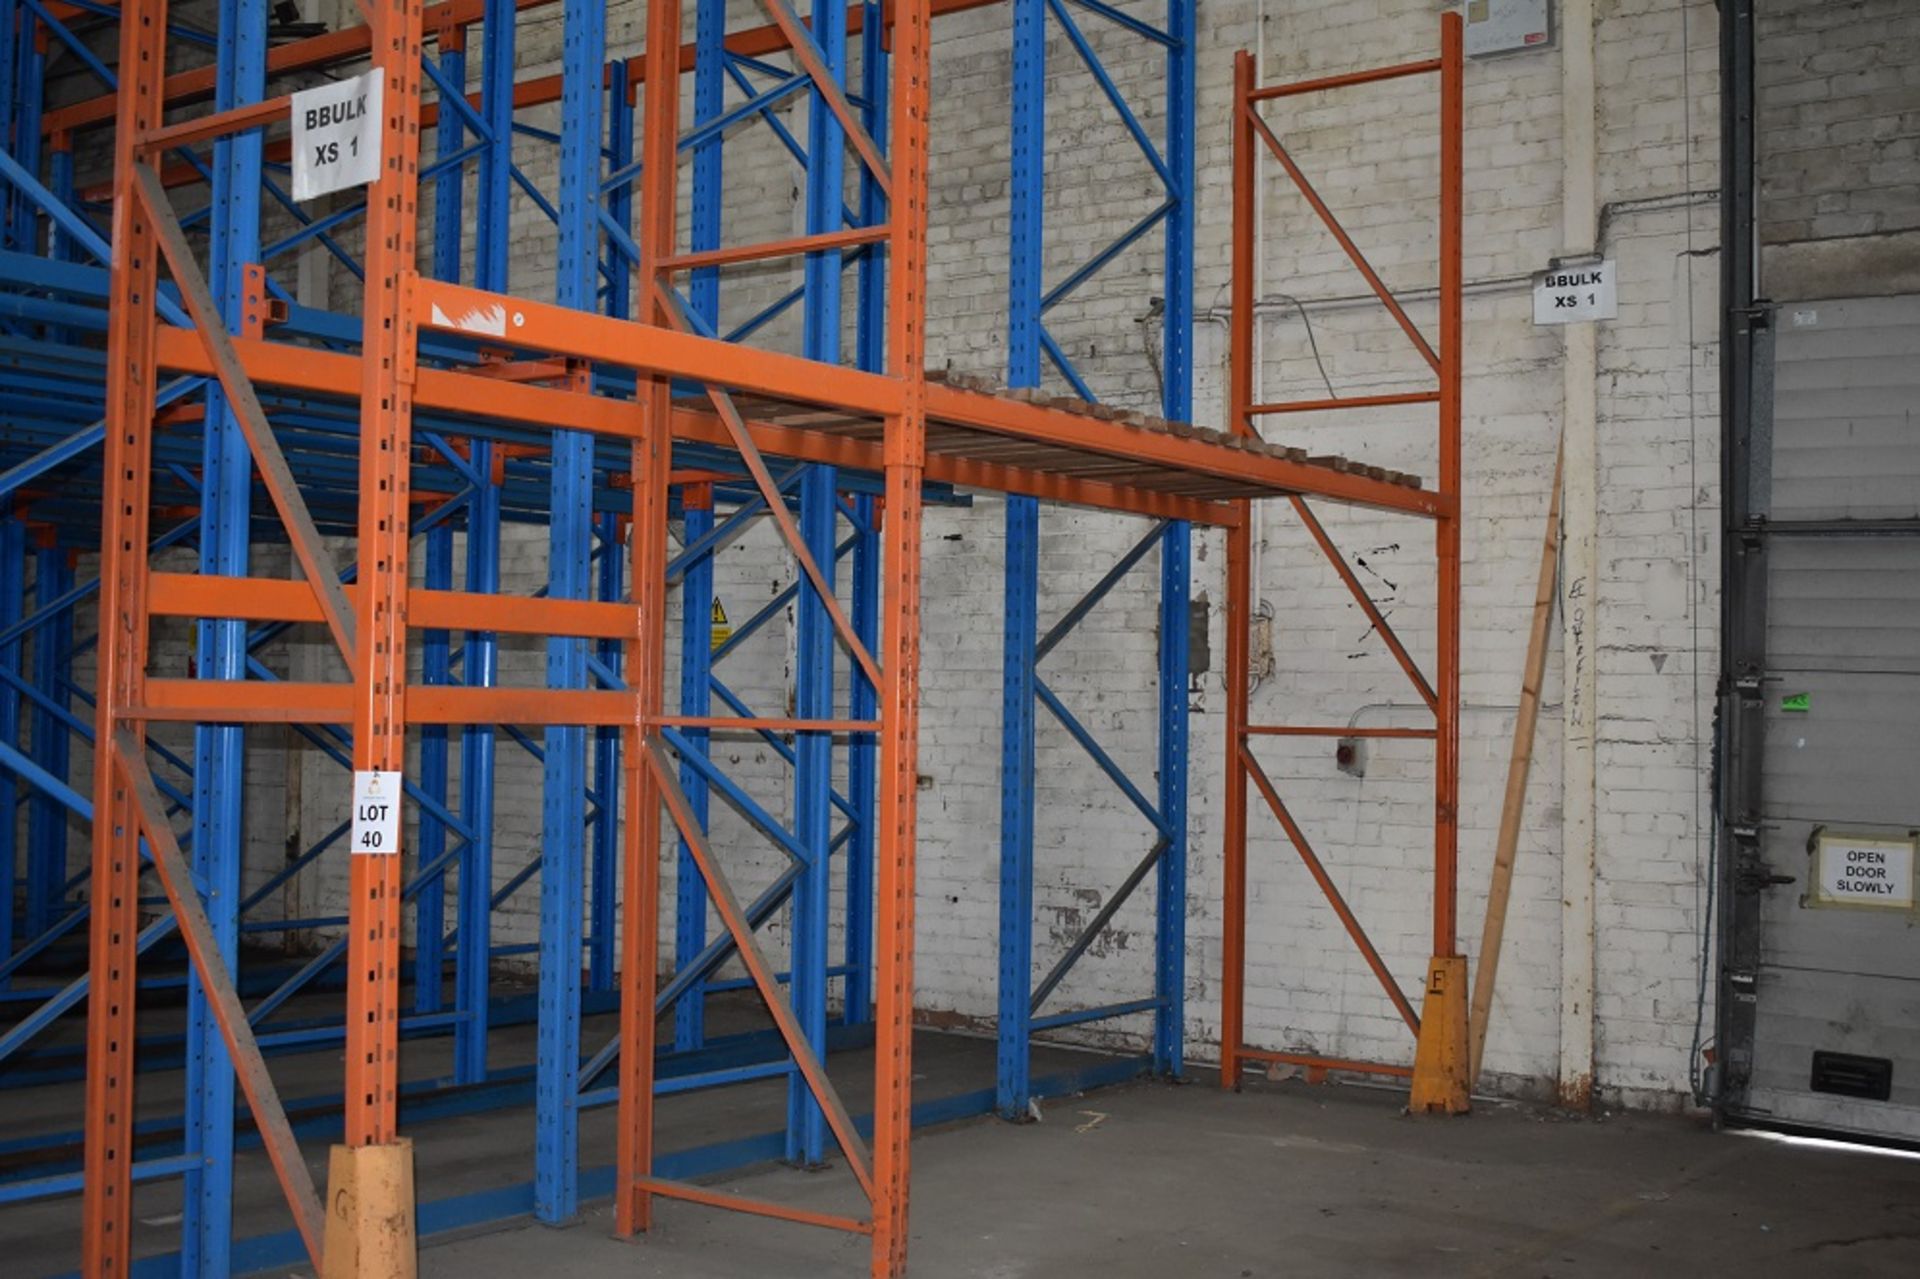 2 X BAYS OF 4 MTR HIGH BOLTLESS PALLET RACKING CONSISTING OF 6 BEAMS 3 X FRAMES - Image 2 of 2